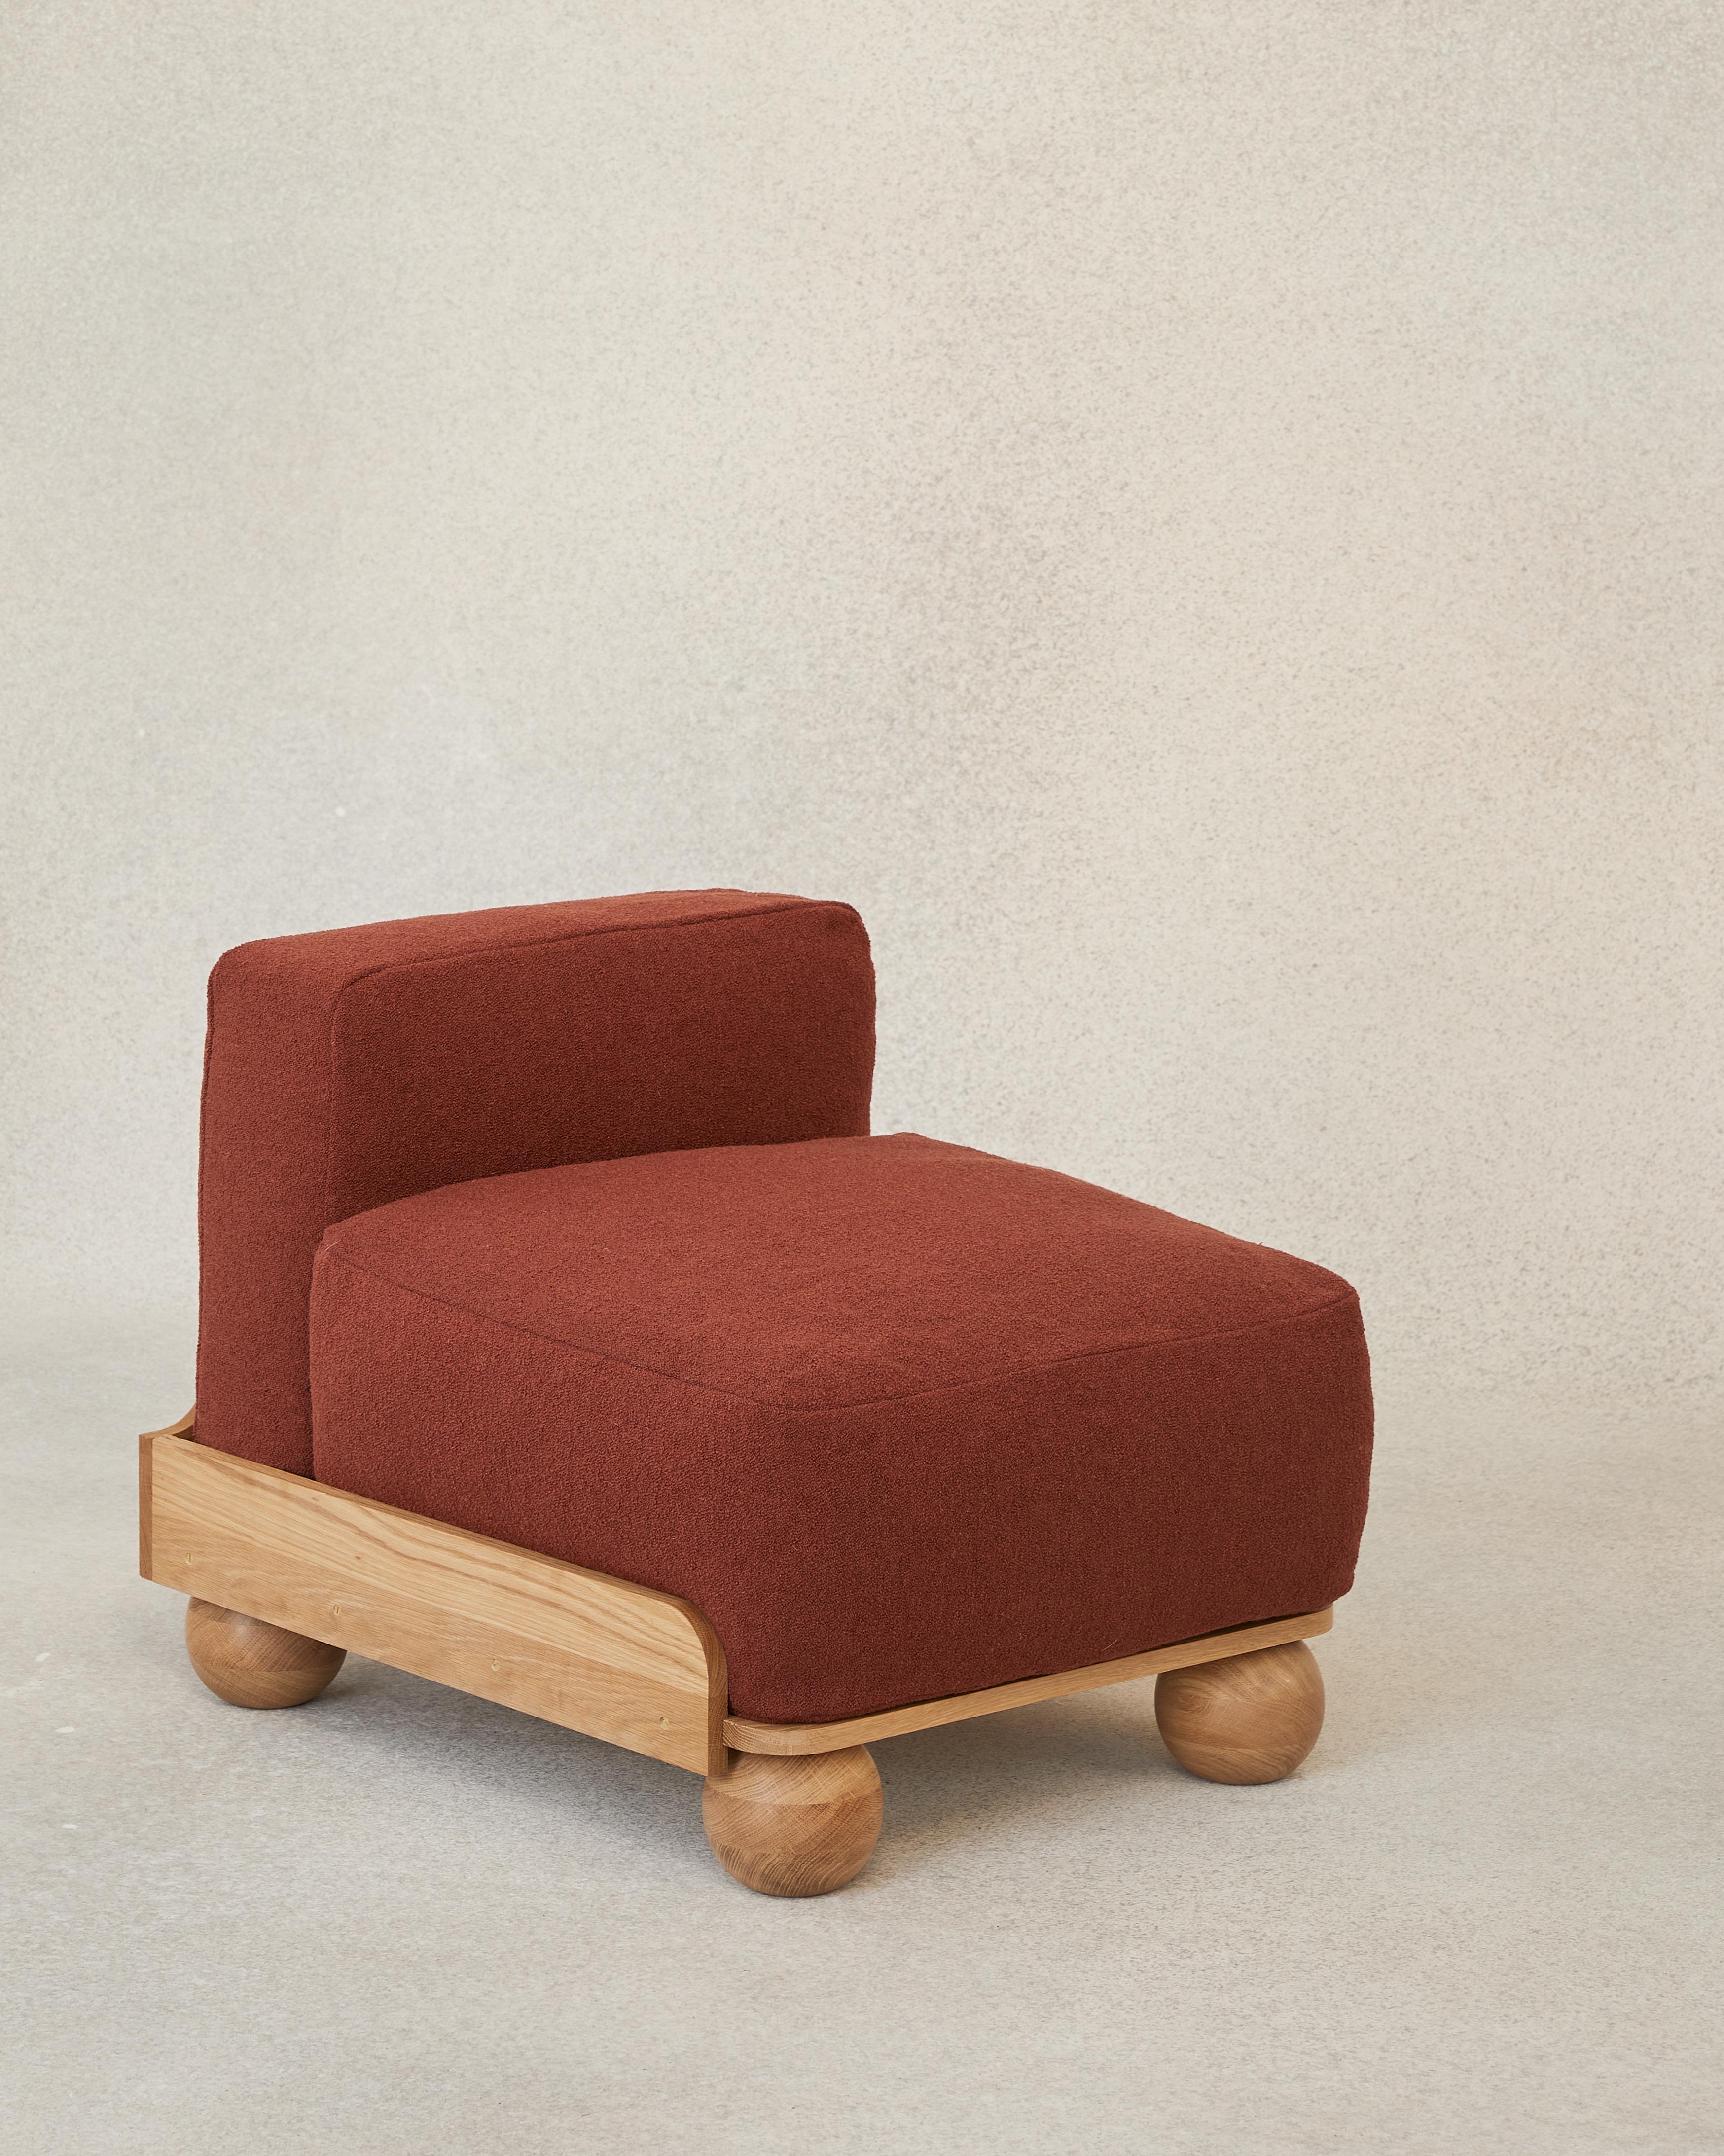 The Cove slipper is a pared back armless seat designed to stand alone or join its modular family: combined into a sofa of any length or paired with the Cove footstool to make a chaise lounge.

Like its Cove siblings, the Sipper reveals all its